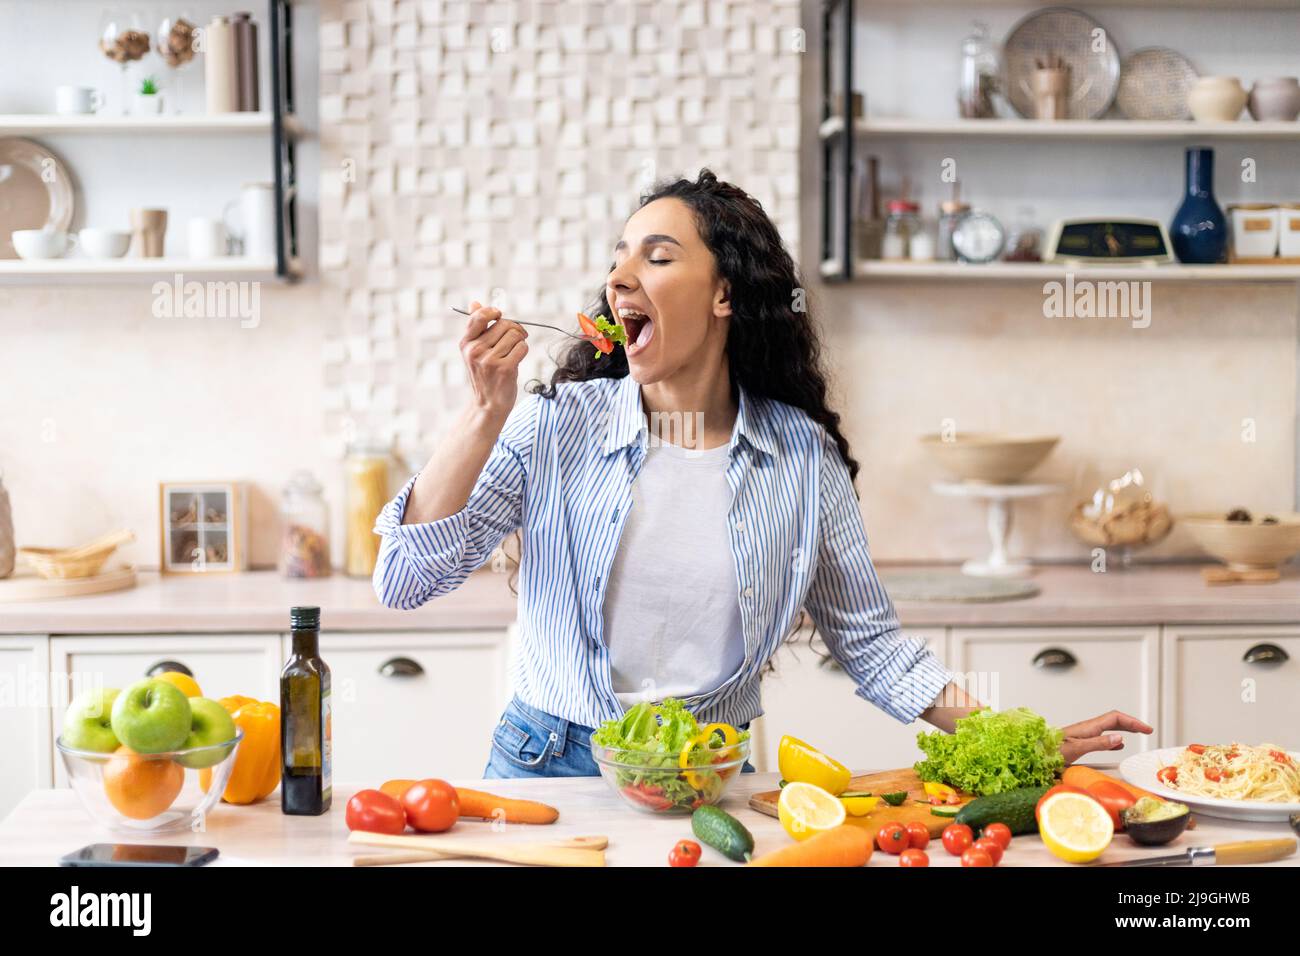 Young woman eating salad at table with organic vegetables, enjoying healthy diet, standing in light kitchen interior Stock Photo